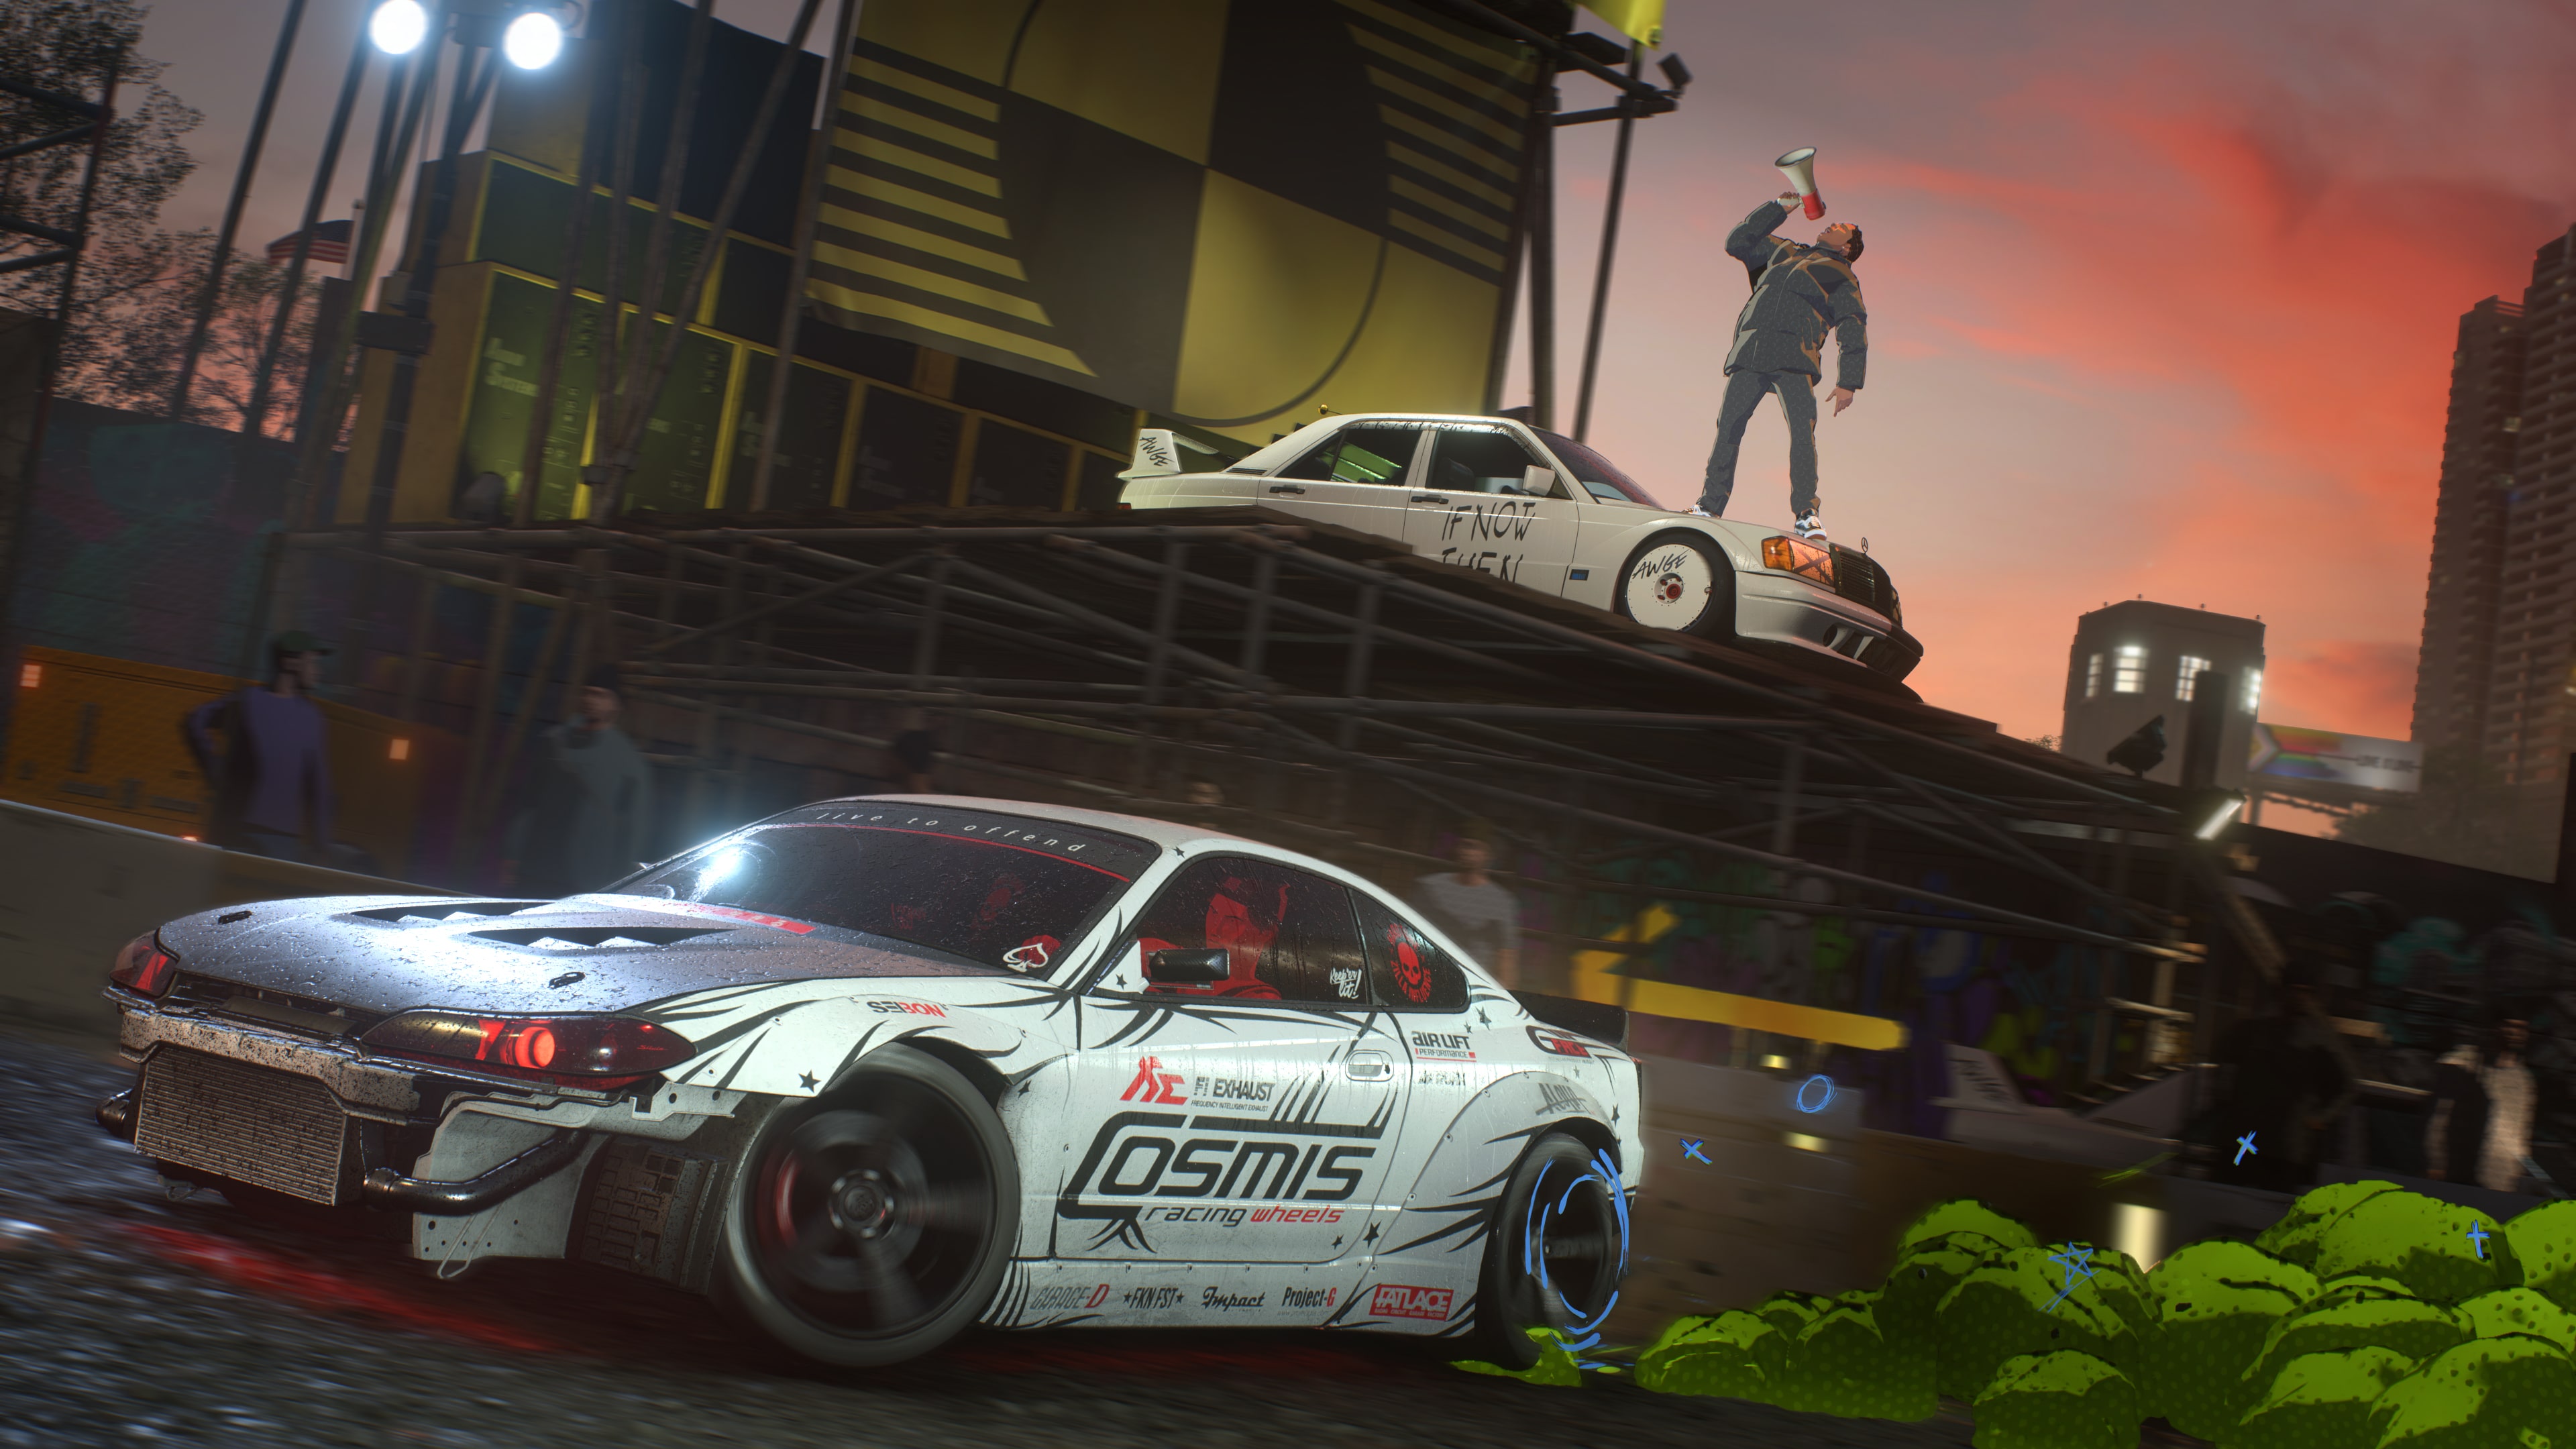 Need For Speed Unbound - PlayStation 5, PlayStation 5